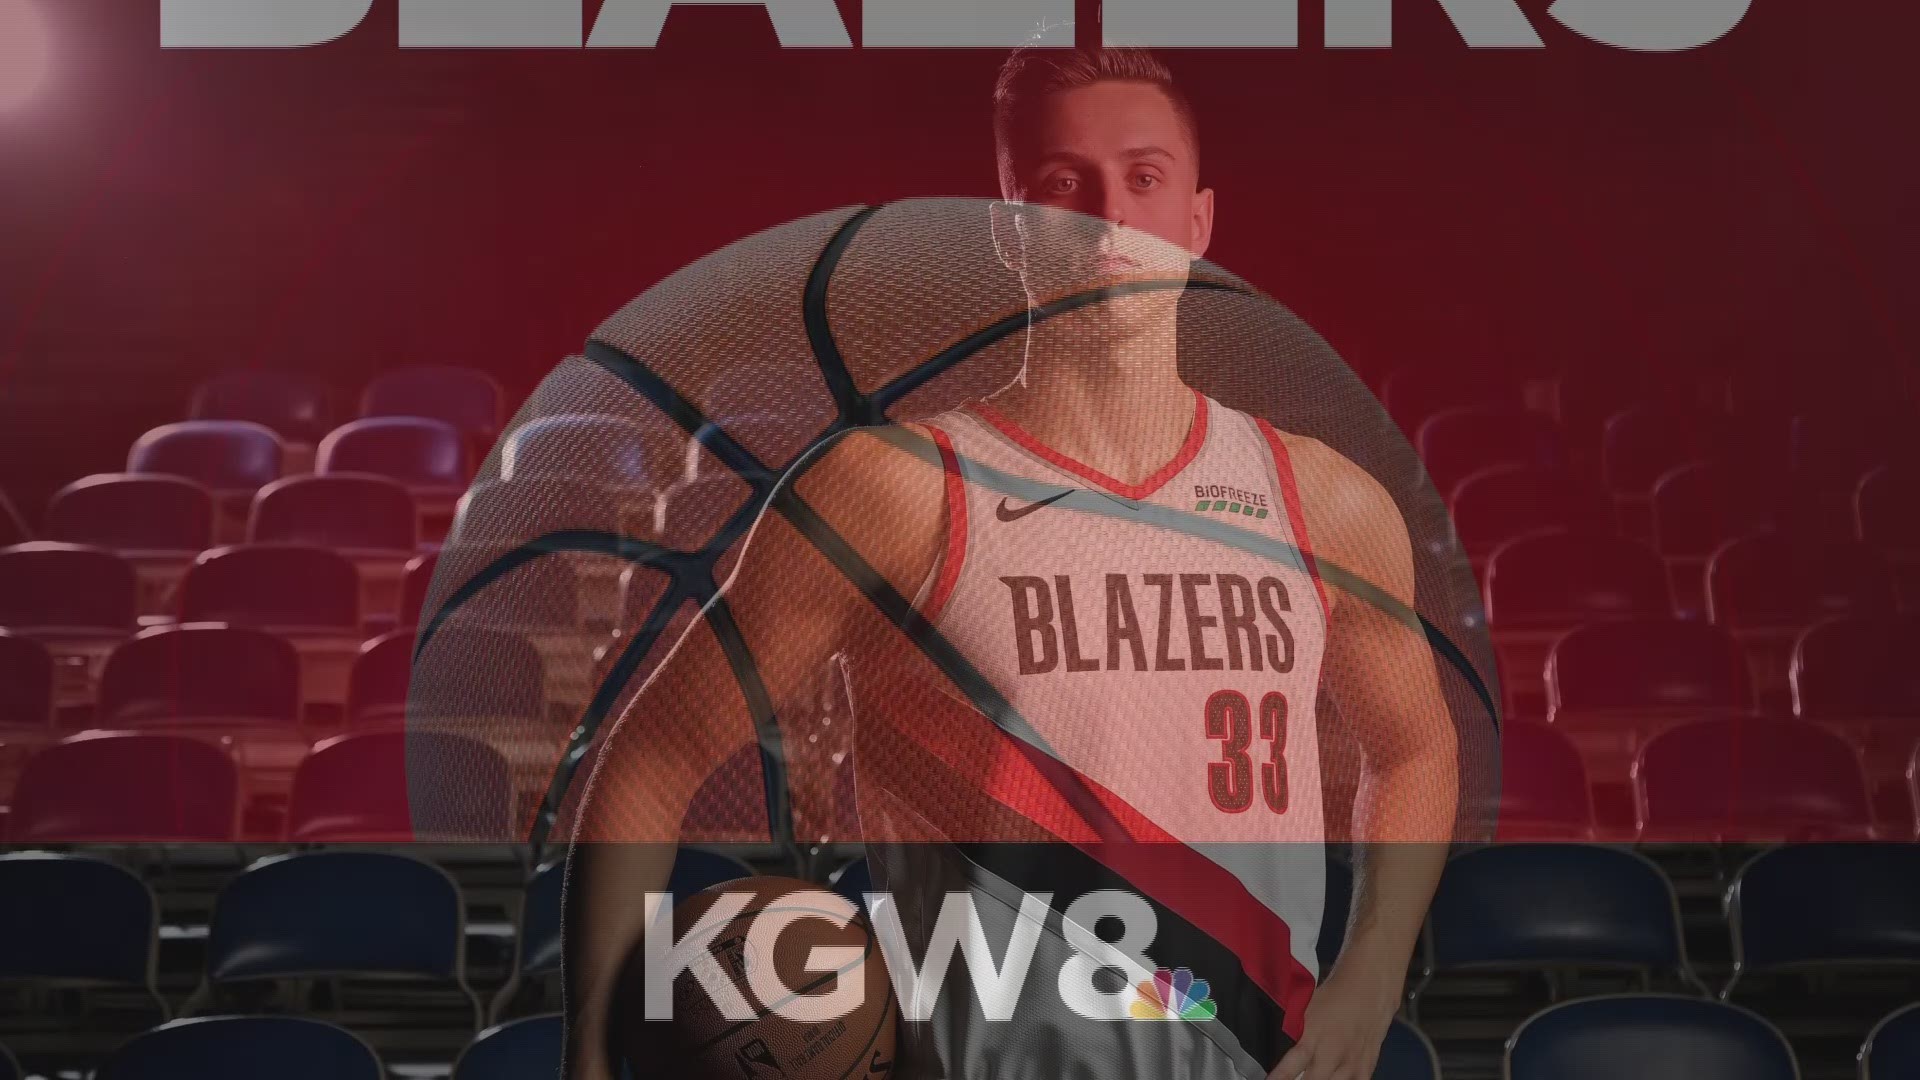 Here's a short tease from the most recent 3-on-3 Blazers podcast. You can listen to the complete episode here: 

iTunes/Apple podcasts: on.kgw.com/2IvYK3w
Podbean: on.kgw.com/2Ivoflu
Stitcher: on.kgw.com/2IvoT2o
Soundcloud: on.kgw.com/2Ix4DNM
Google